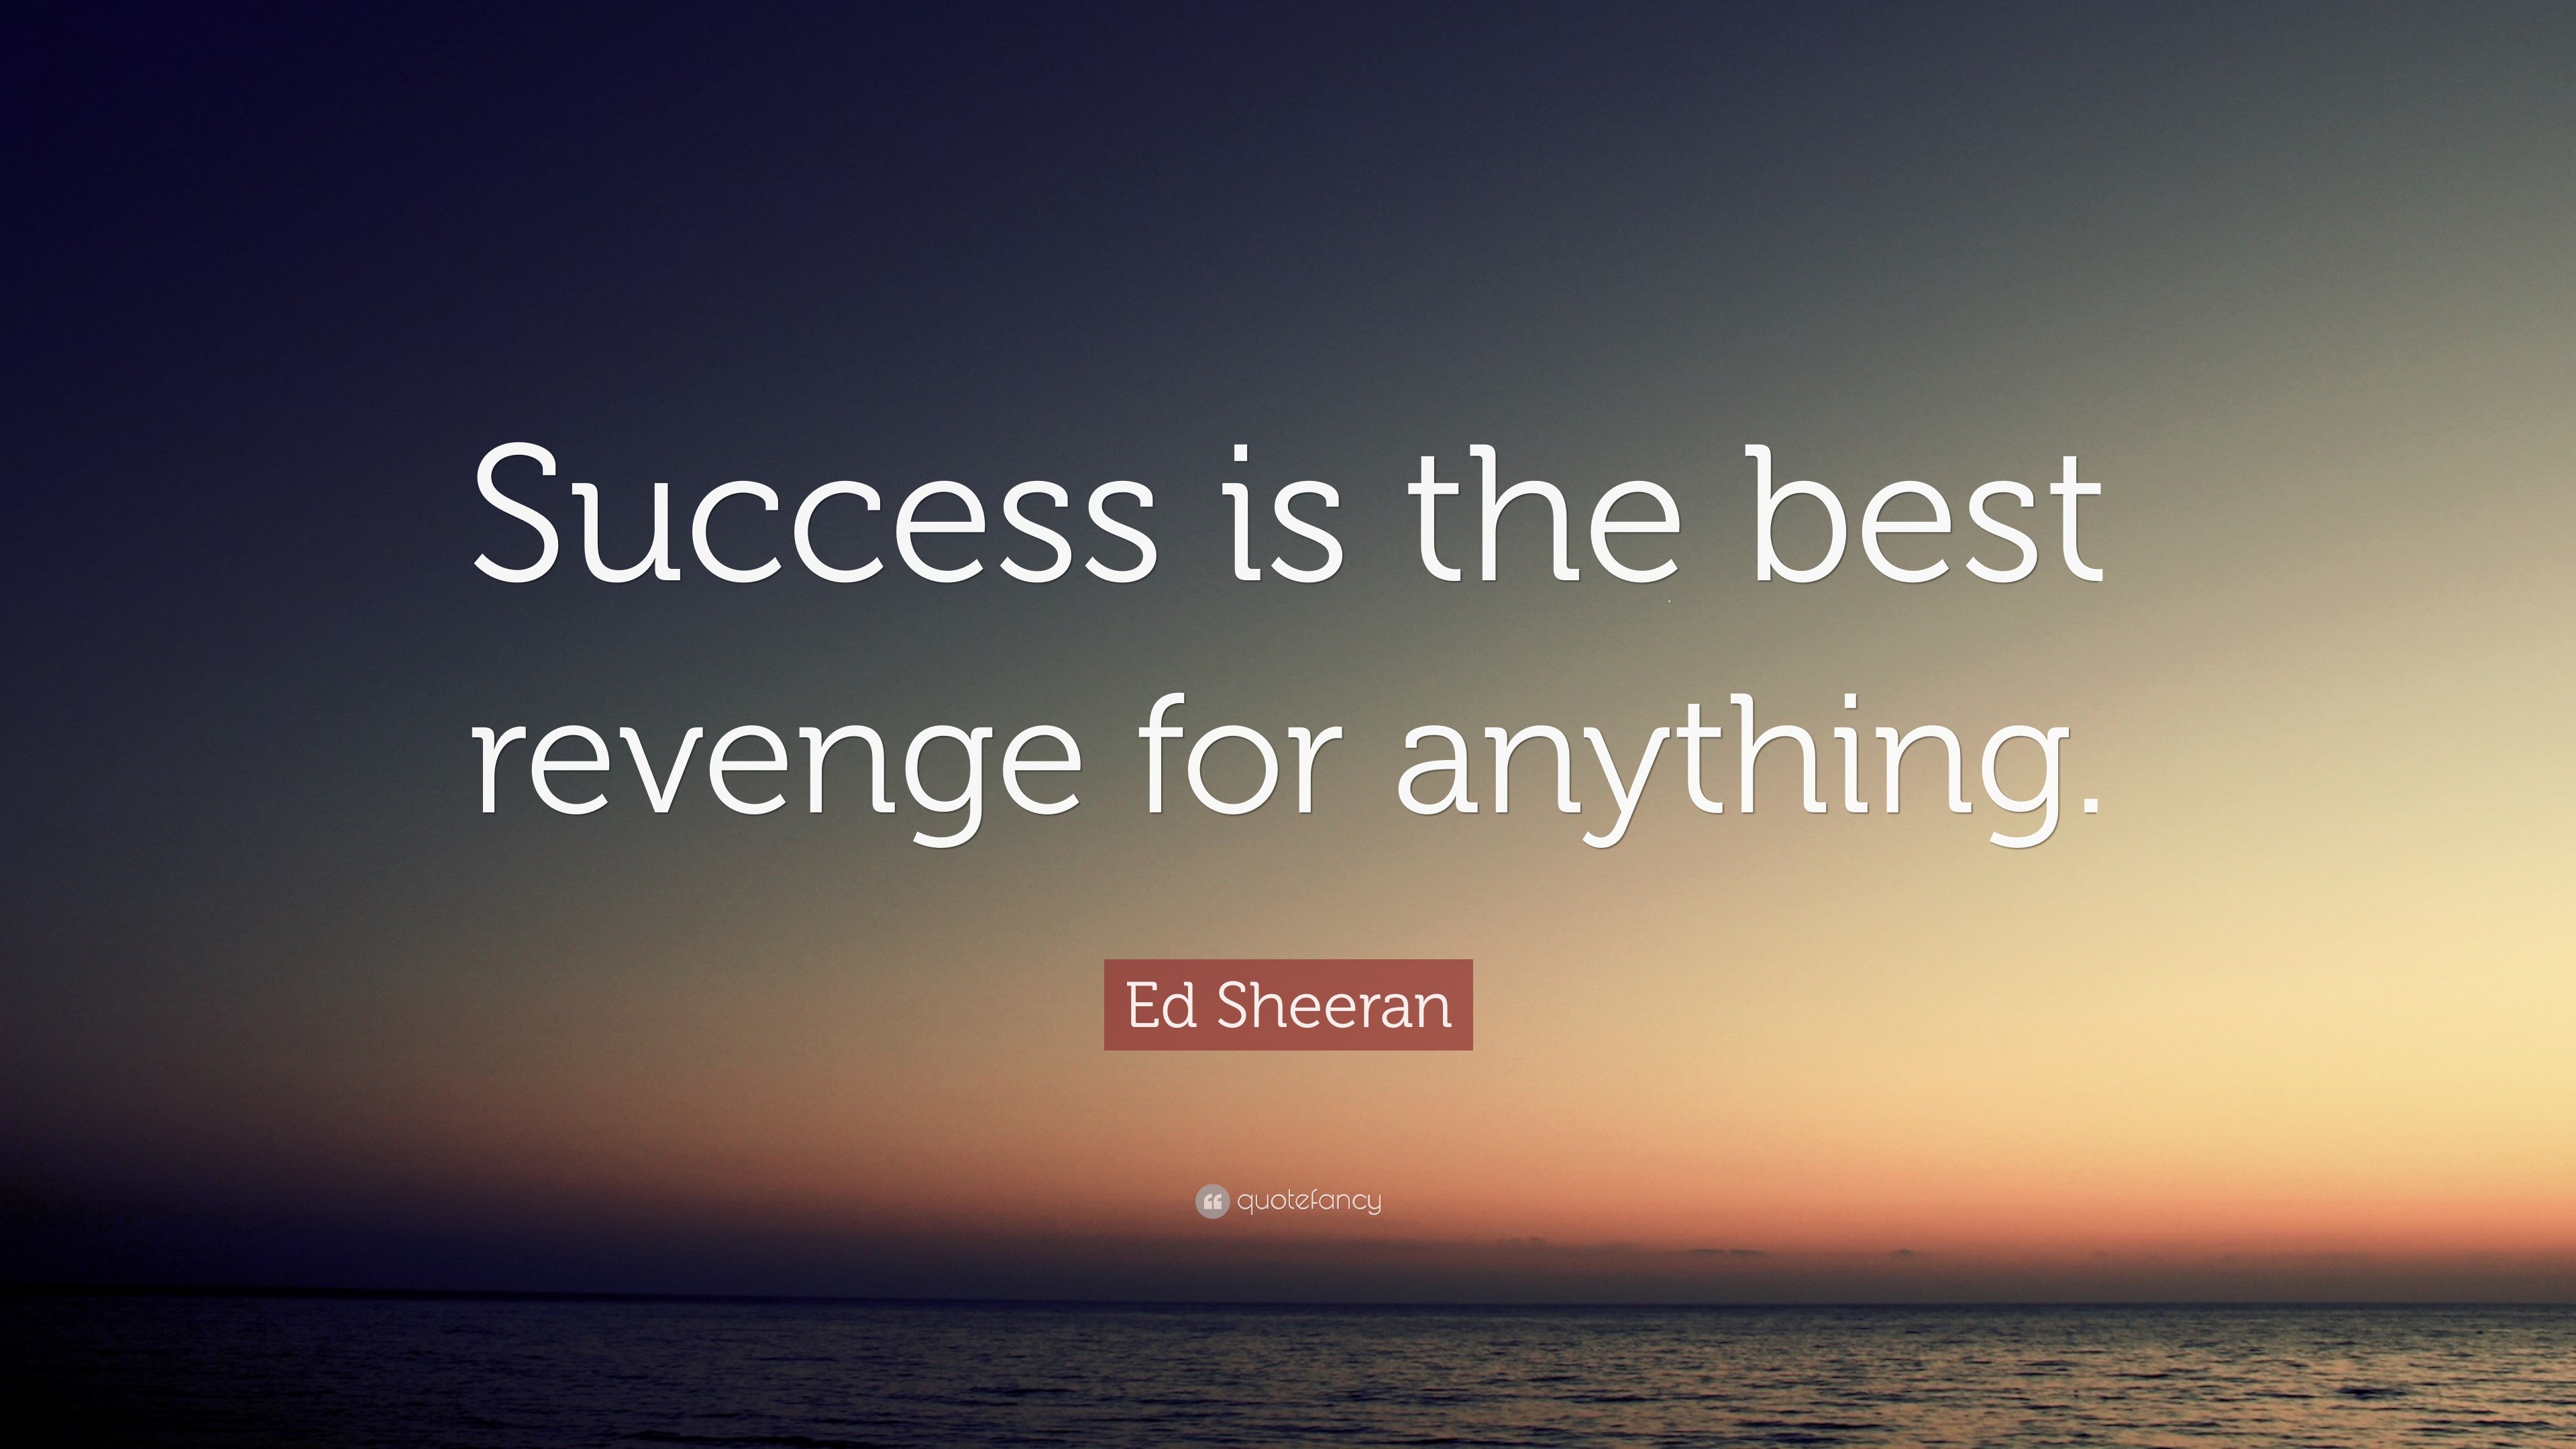 1715176-Ed-Sheeran-Quote-Success-is-the-best-revenge-for-anything.jpg